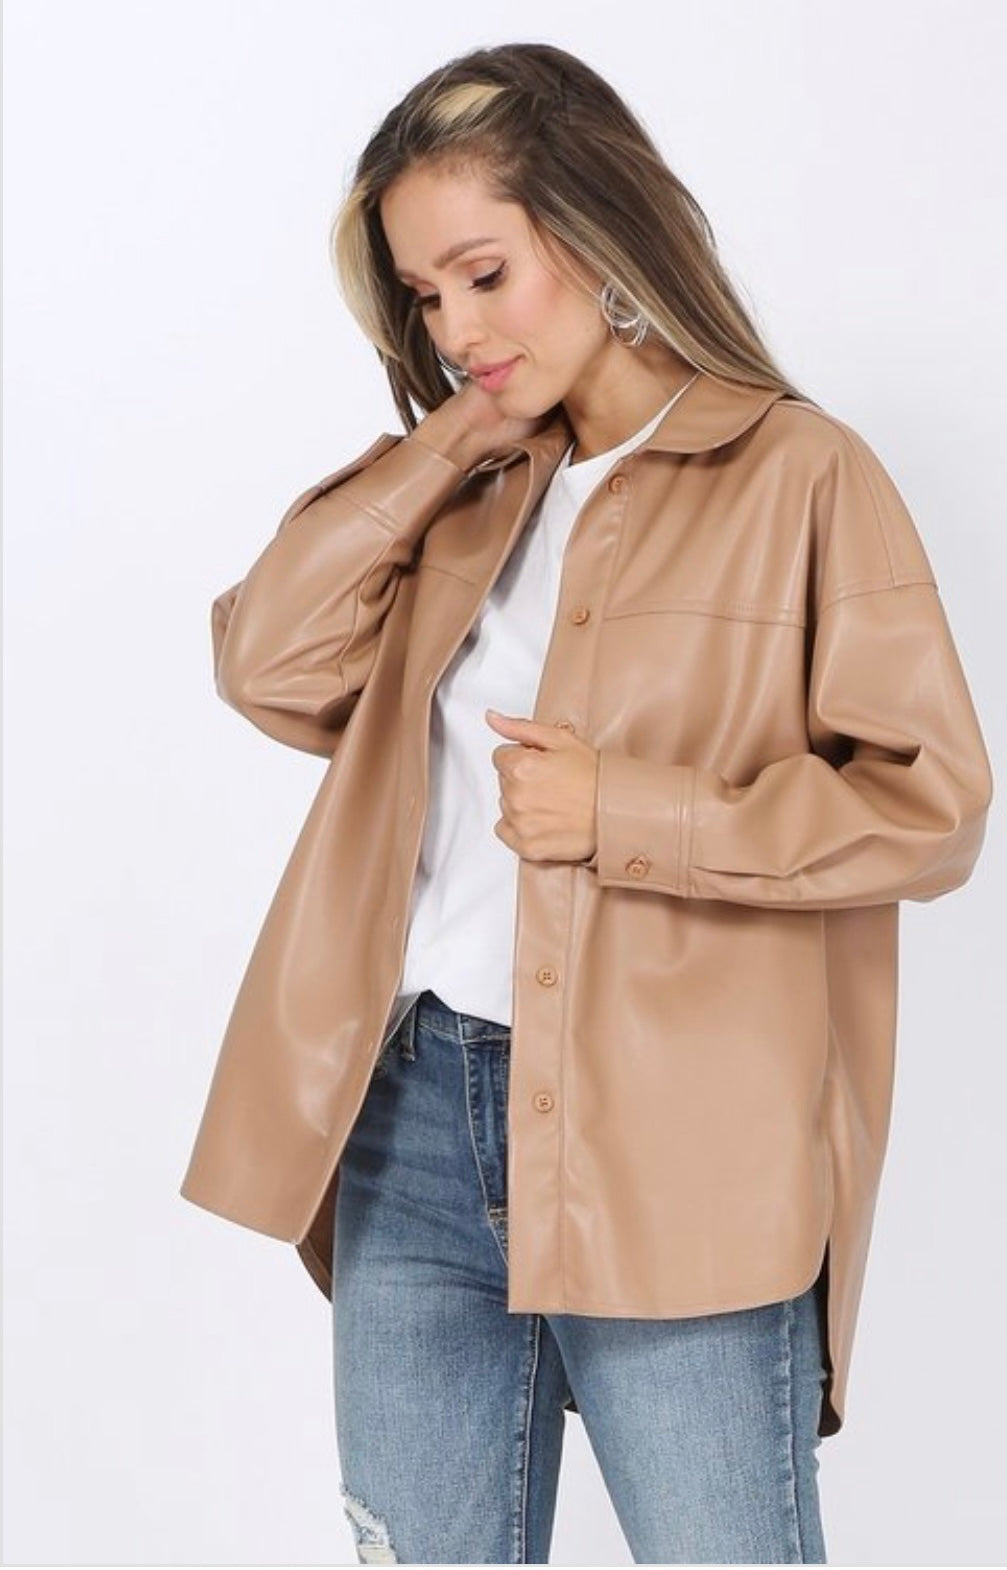 Amora Vegan Leather Jacket - Corinne Boutique Family Owned and Operated USA